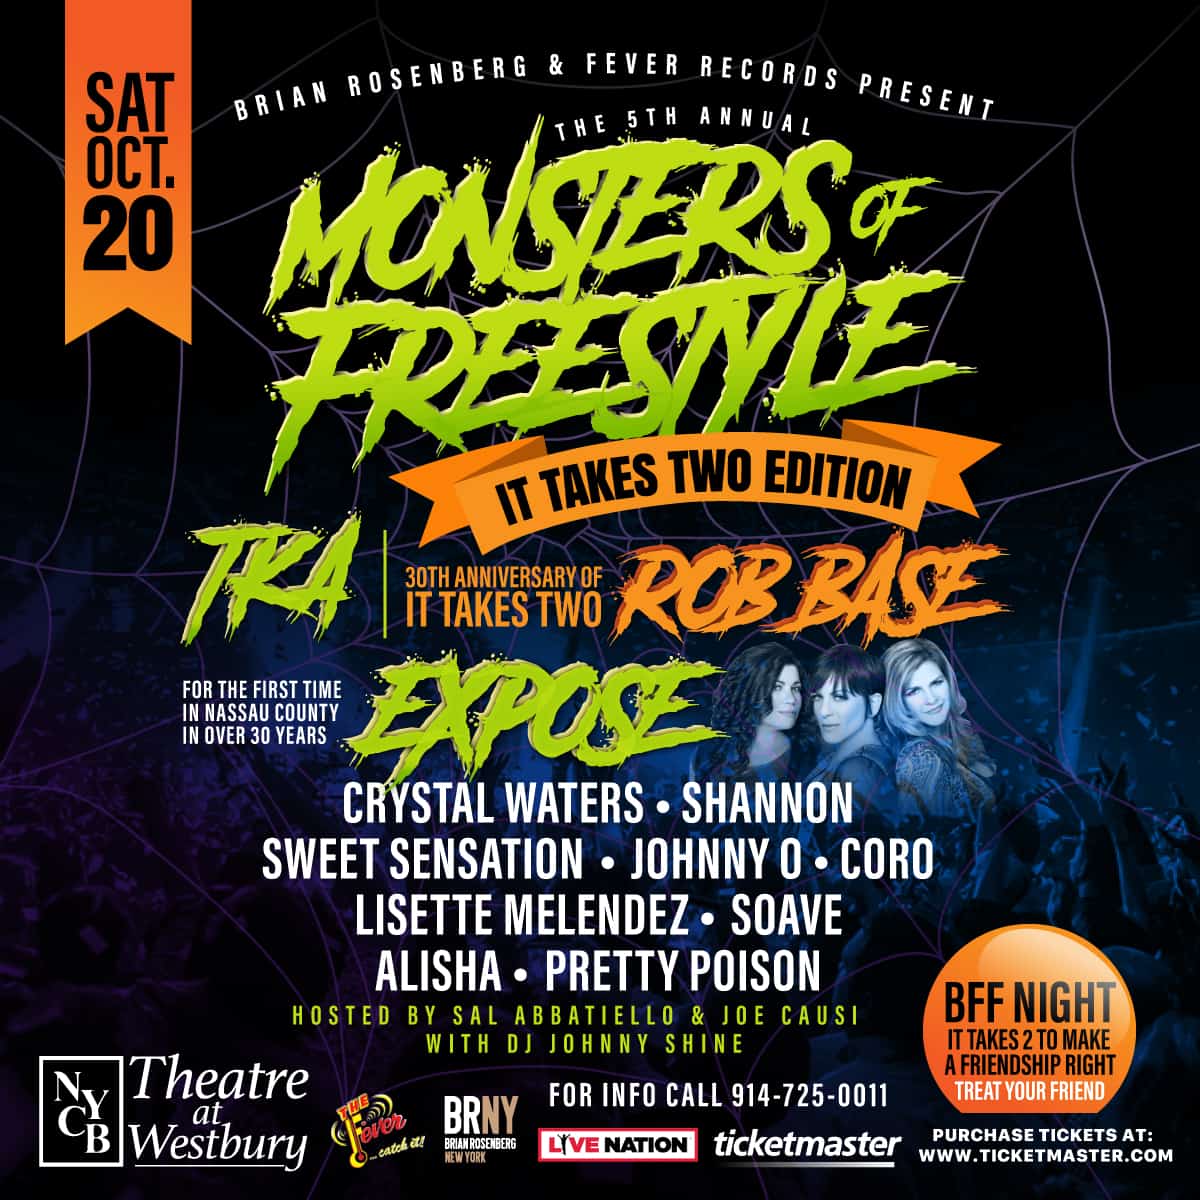 Monsters of Freestyle